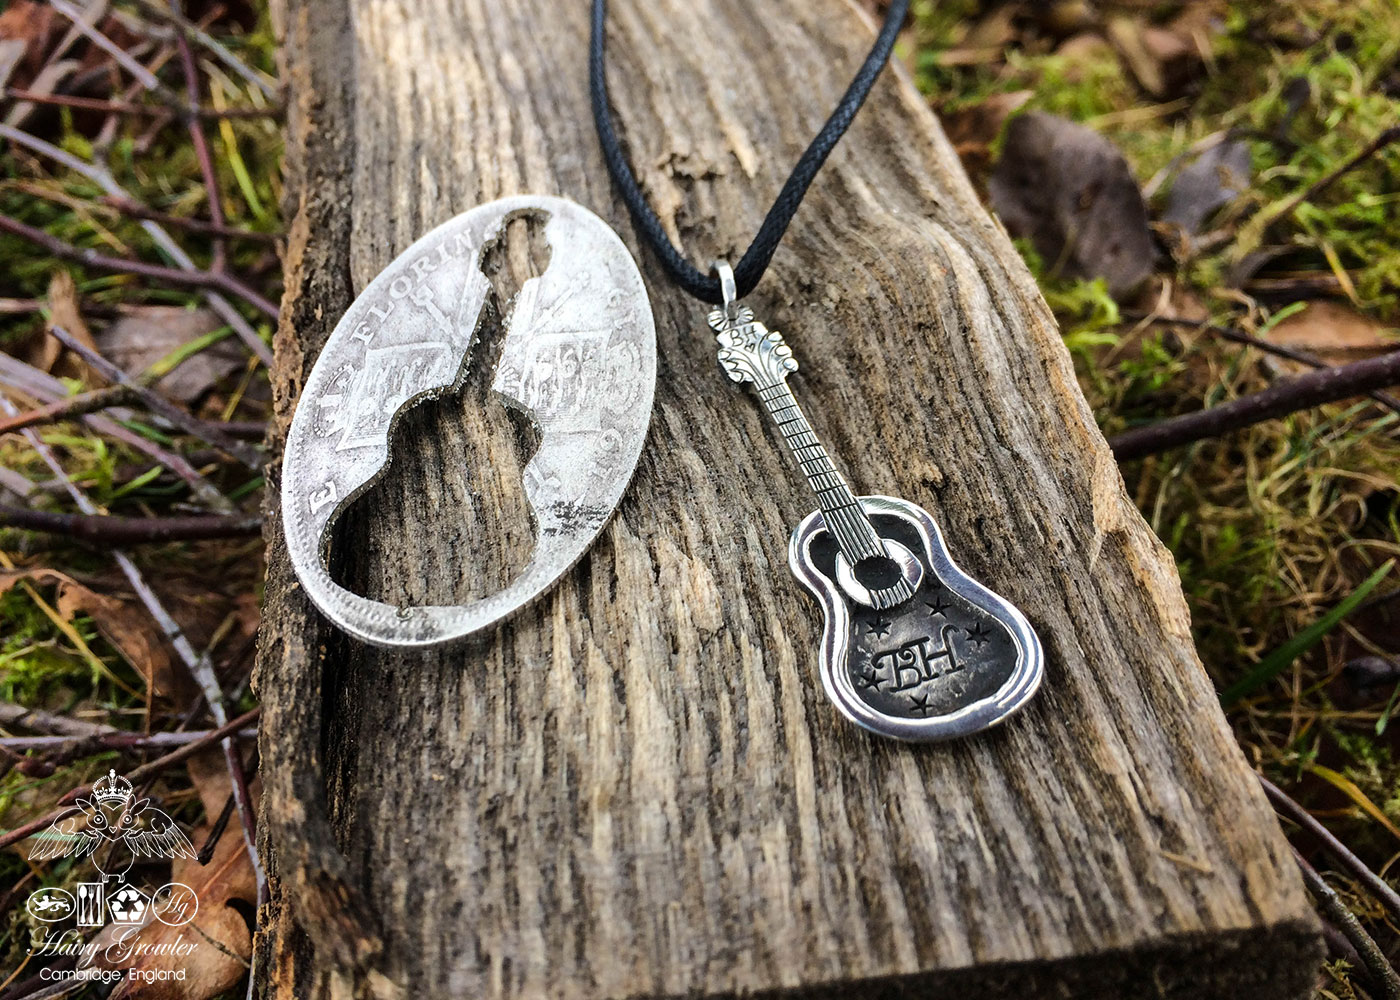 guit-box, acoustic guitar necklace - handmade and recycled using silver coins